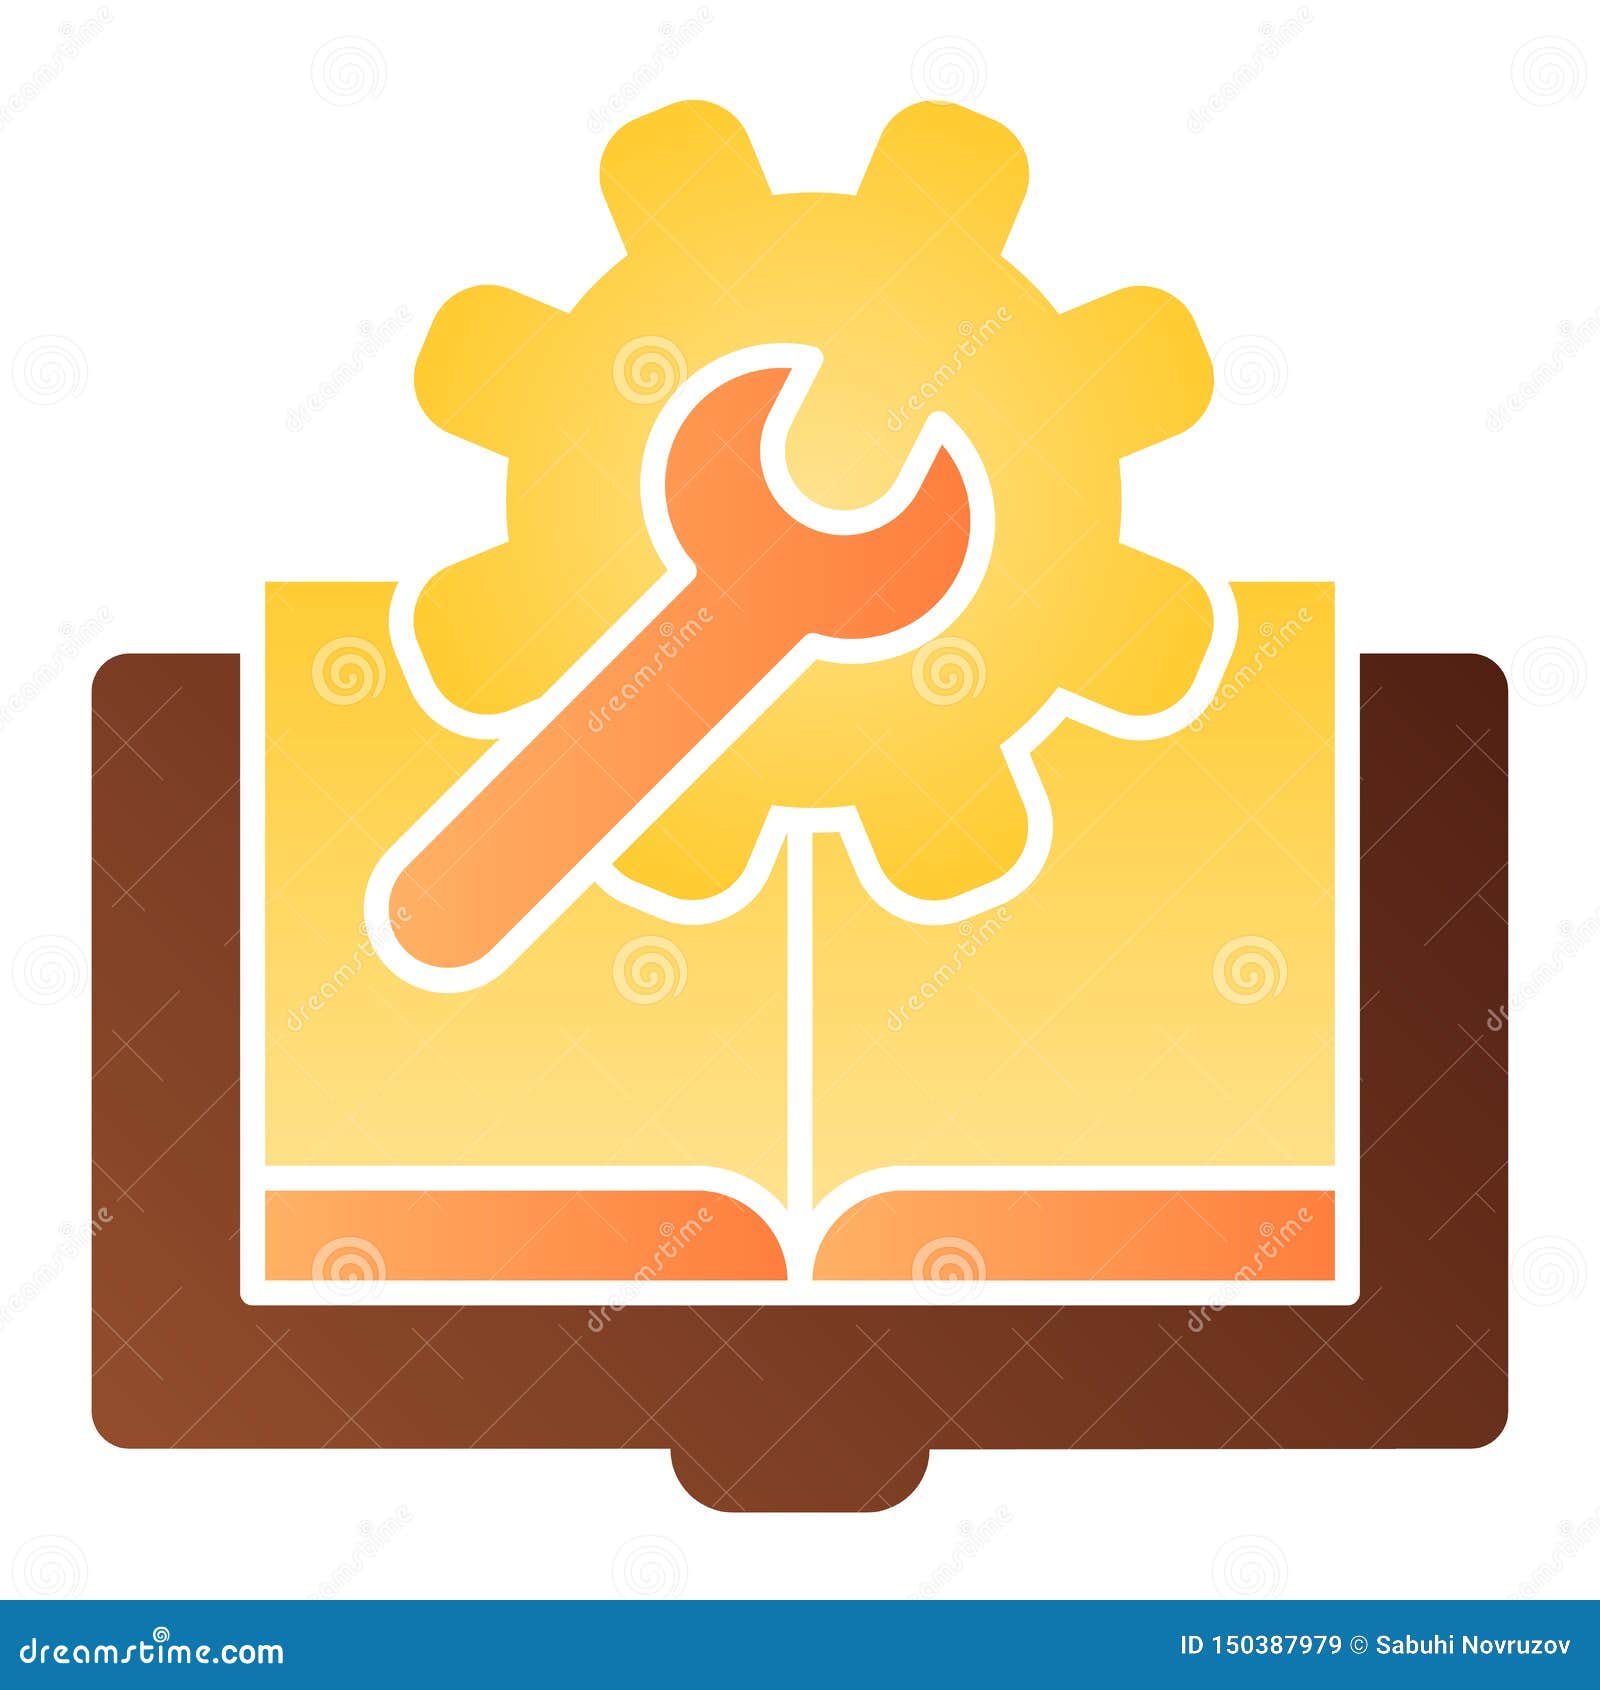 Technical Literature Flat Icon Book With Cogwheel Color Icons In Trendy Flat Style Book And Gear Gradient Style Design Stock Vector Illustration Of Library Logo